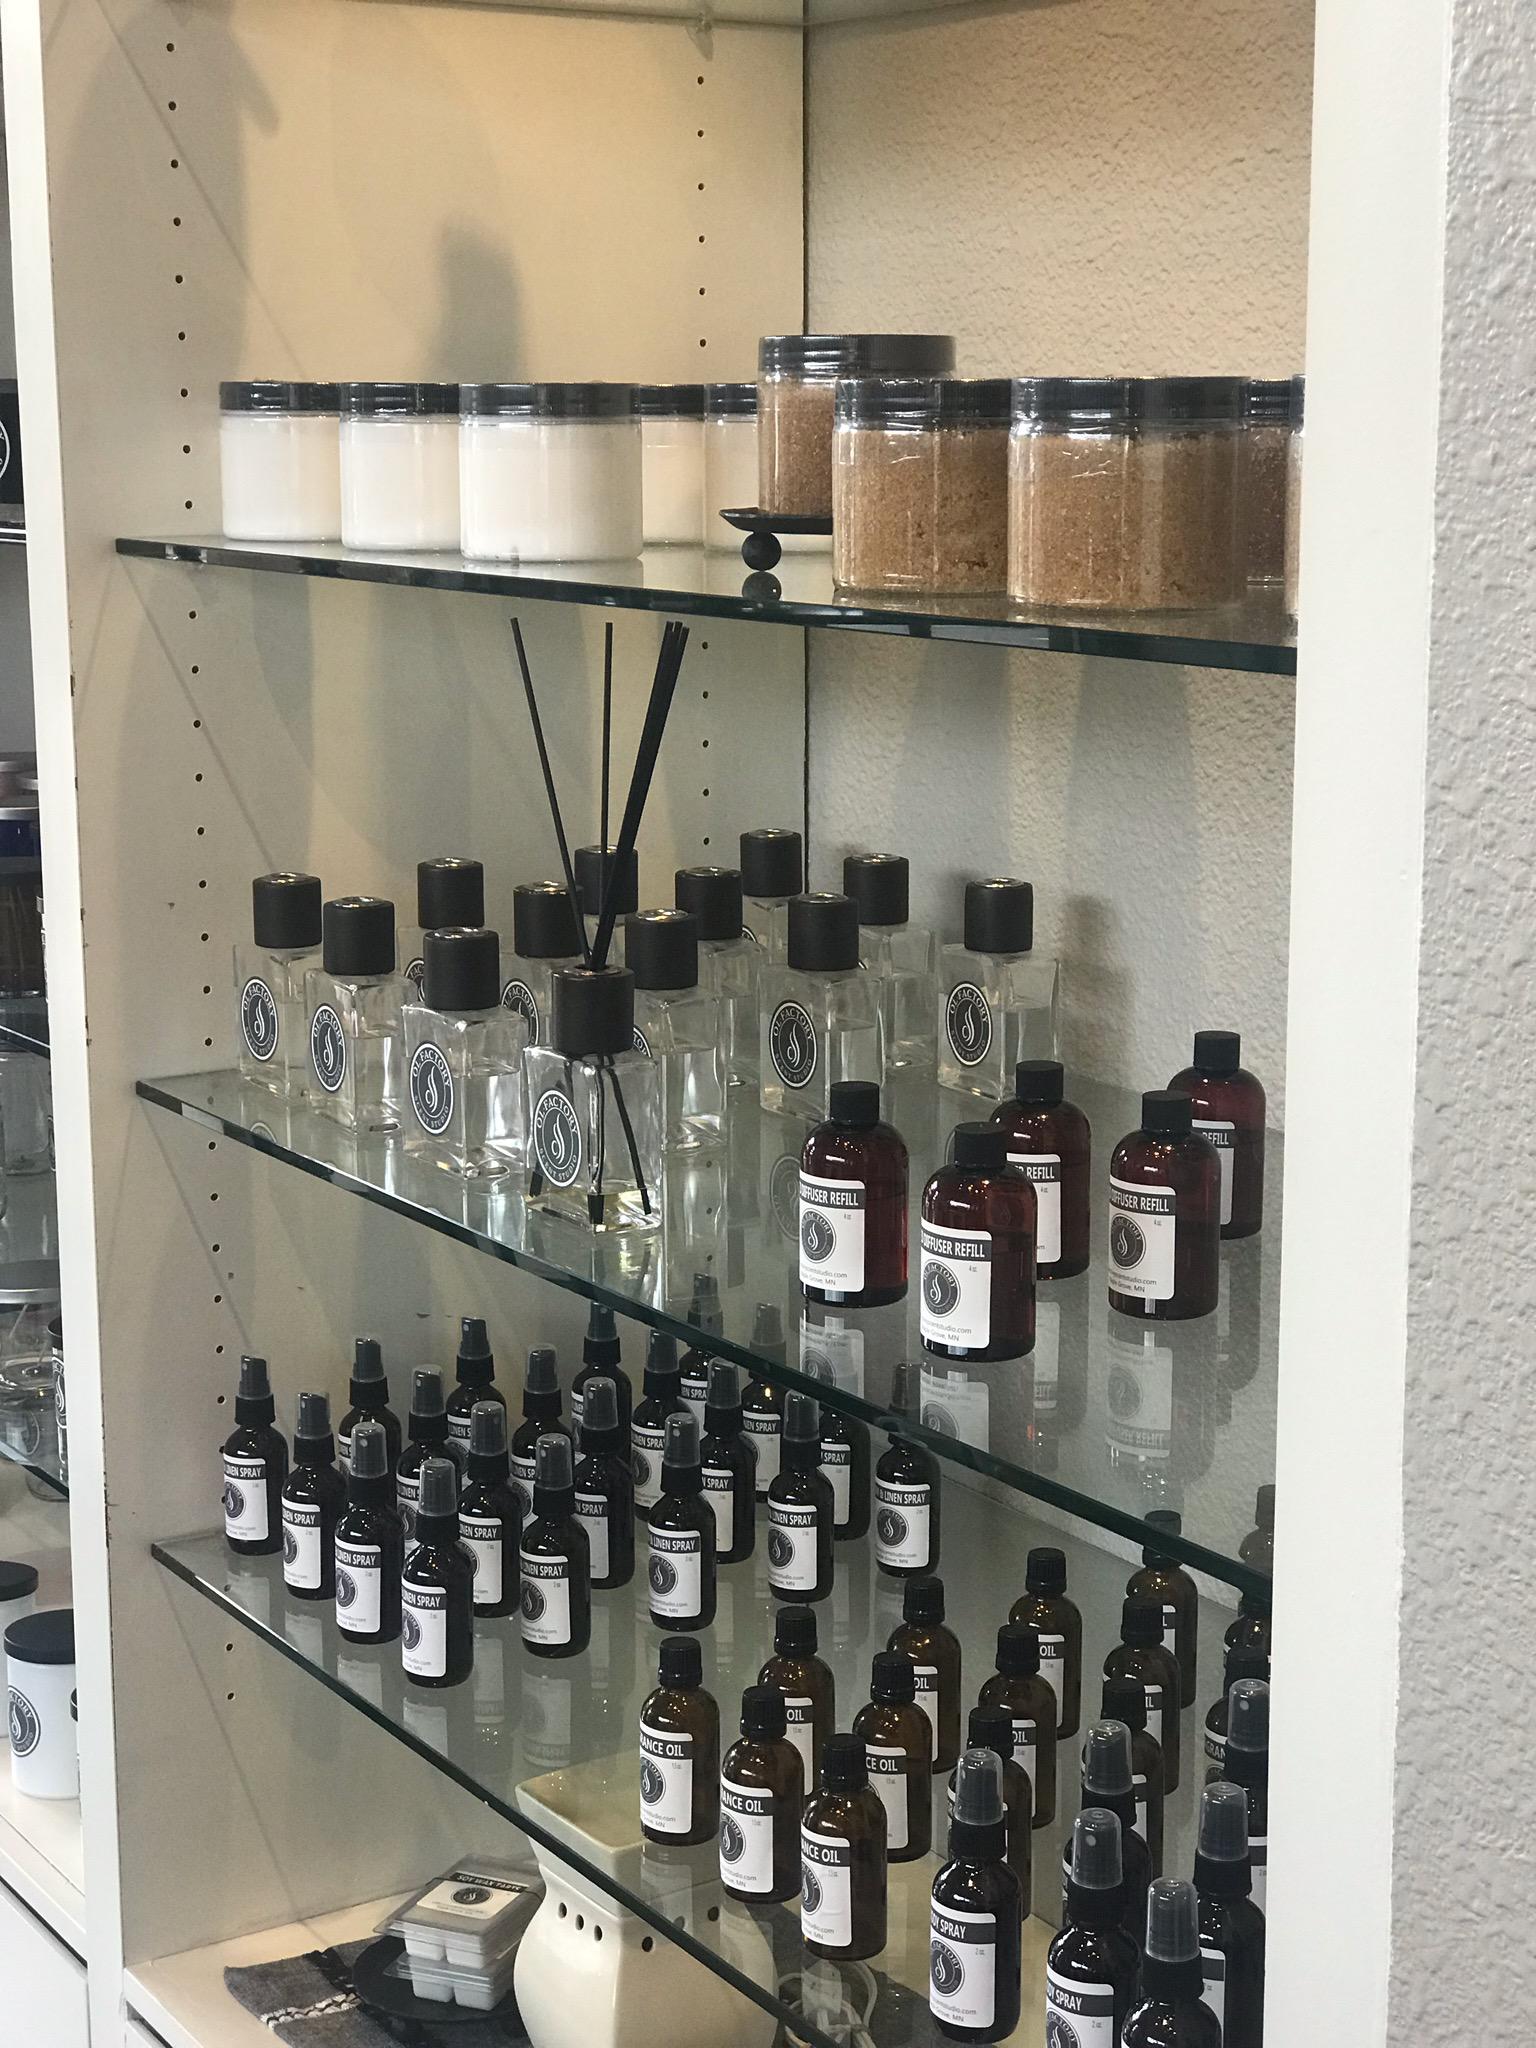 Don't have time to come in and enjoy the entire experience this time? Not a problem! You can order s Olfactory Scent Studio Maple Grove (763)350-6953